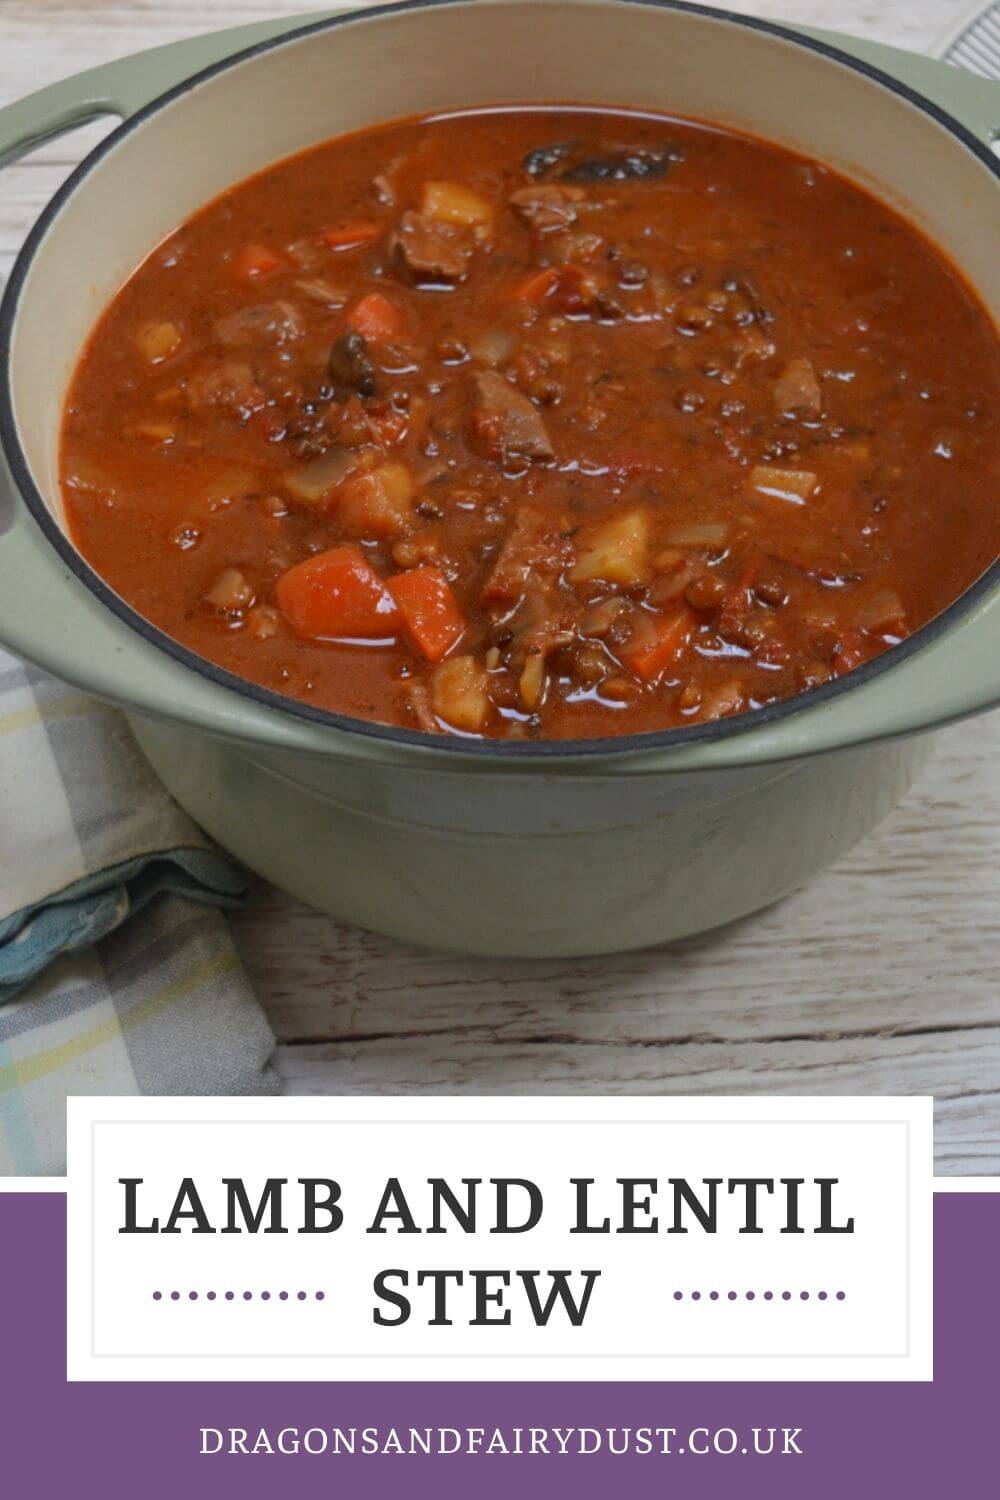 Lamb and lentil stew. A delicious and easy to make one pot meal which is pefect for a blustery spring day